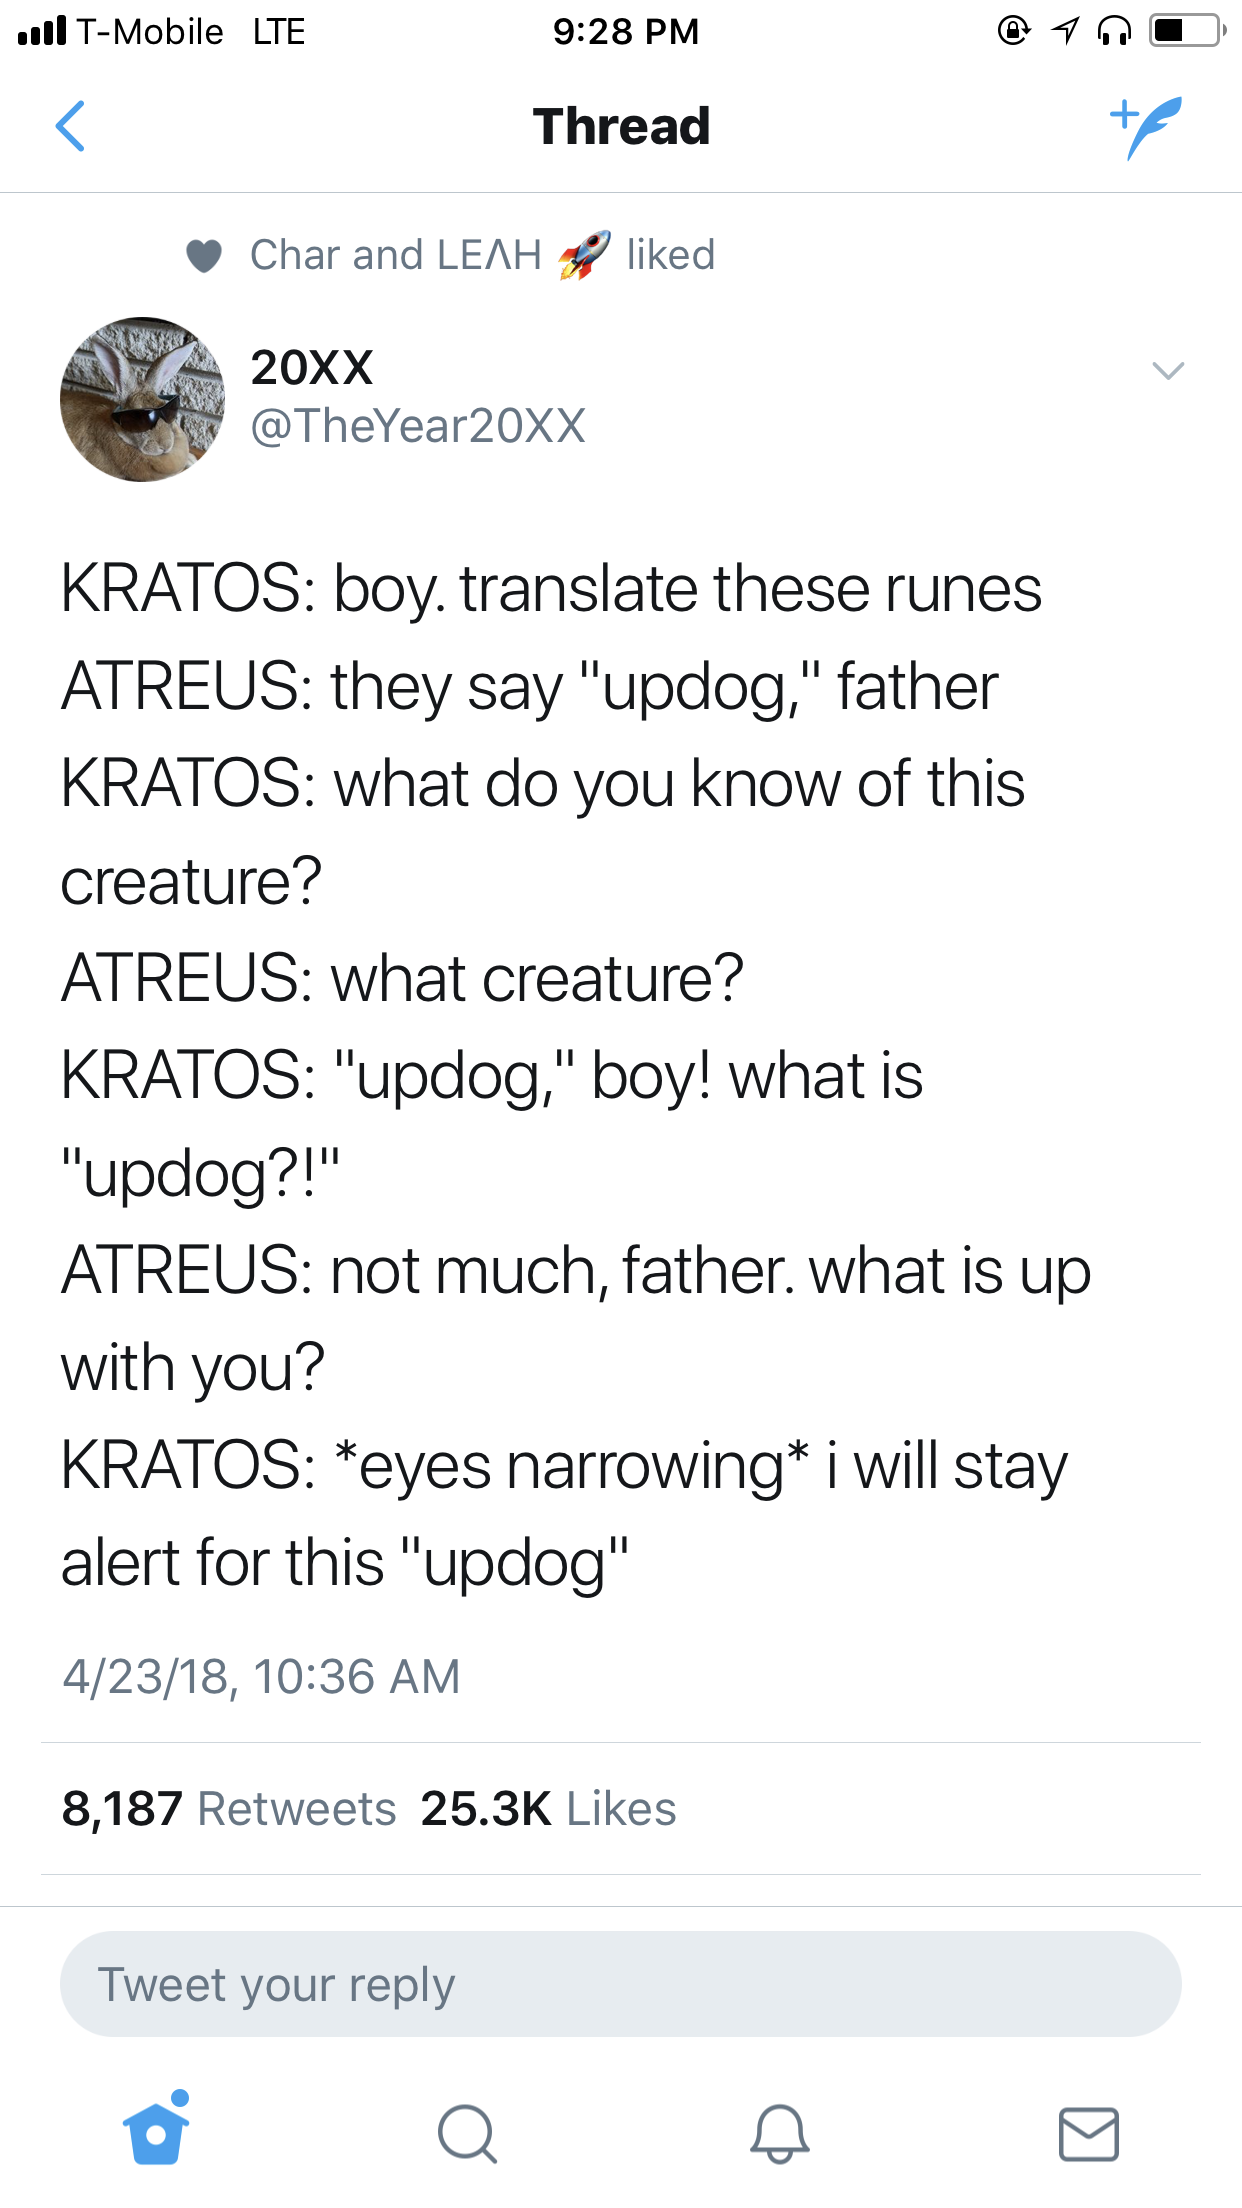 screenshot - .. TMobile Lte 400 Thread Char and Leah d 20xx Kratos boy, translate these runes Atreus they say "updog," father Kratos what do you know of this creature? Atreus what creature? Kratos "updog," boy! what is "updog?!" Atreus not much, father. w